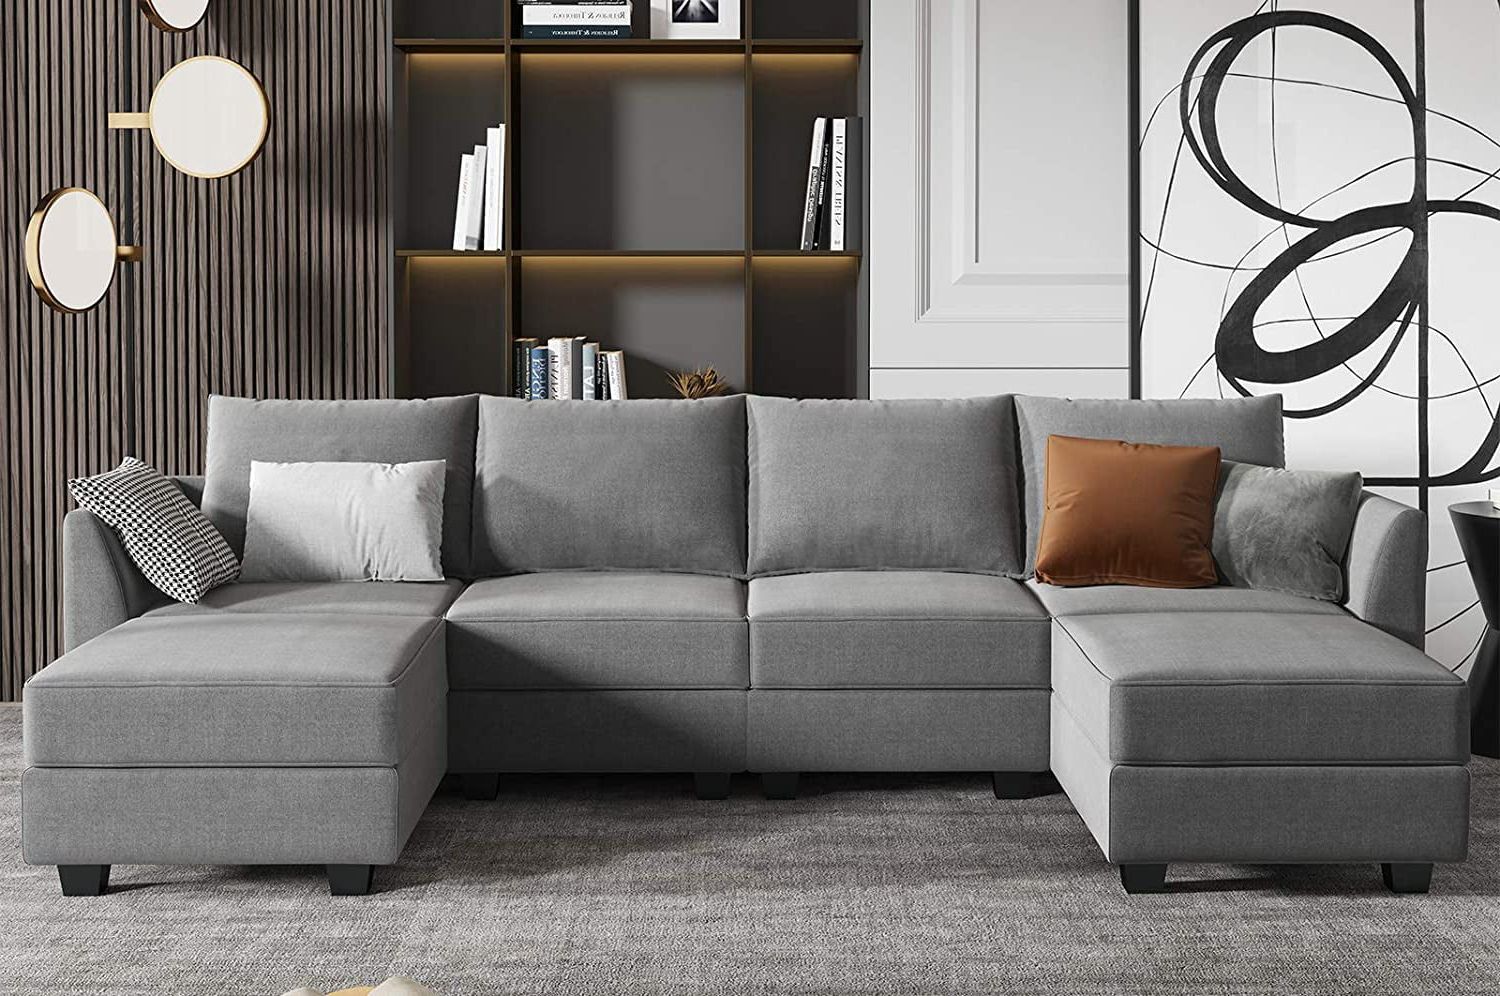 Honbay Modular Sectional Sofa U Shaped Couch With Reversible Chaise Inside Trendy Modern U Shape Sectional Sofas In Gray (View 3 of 15)